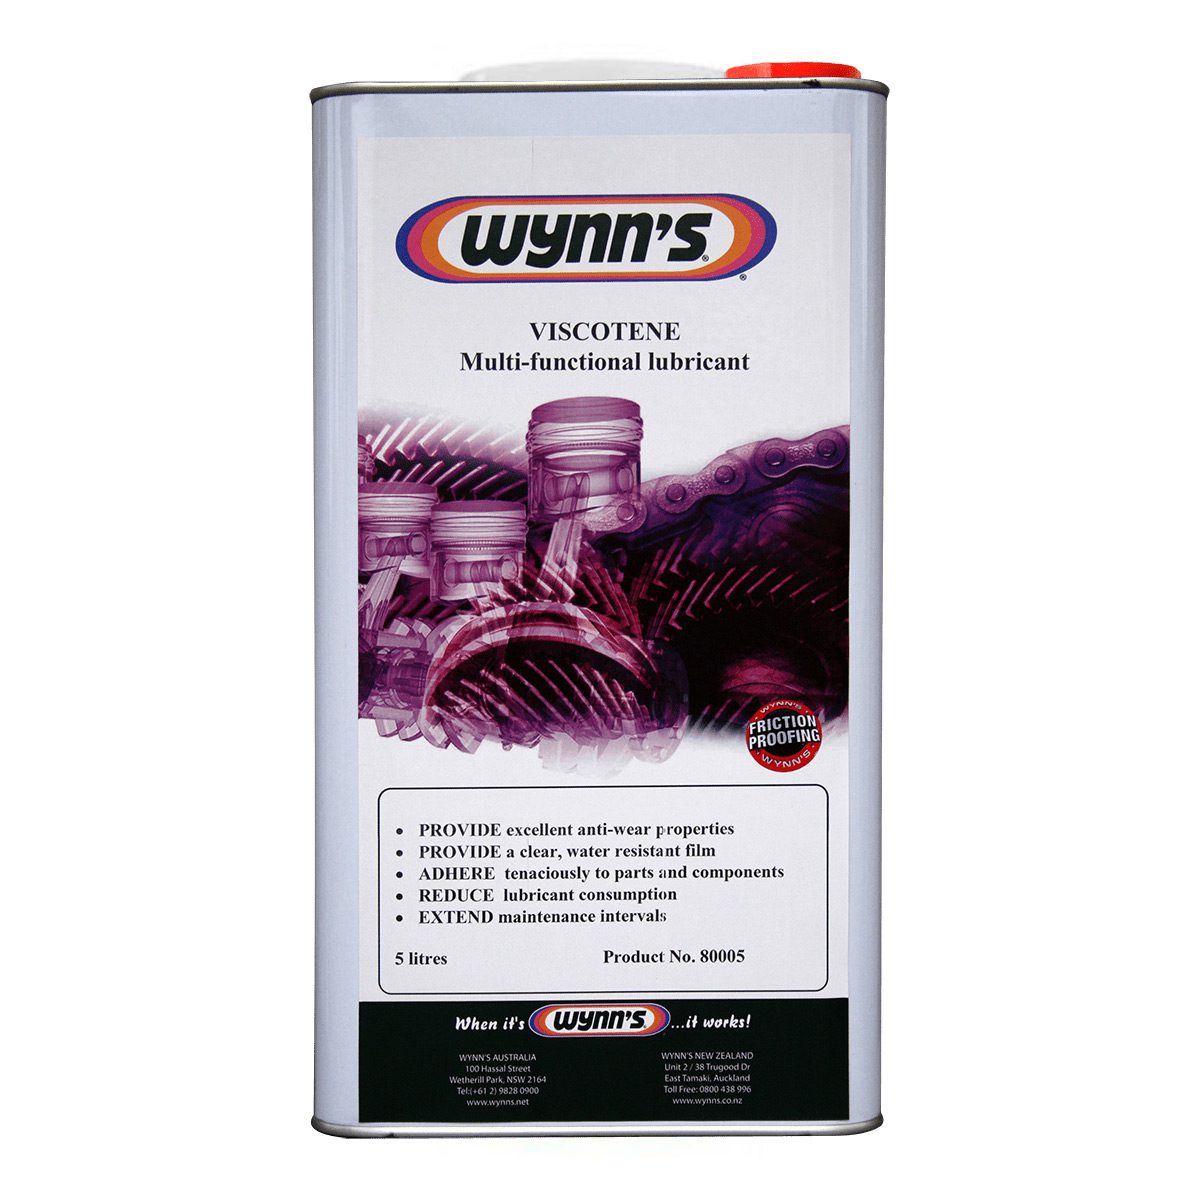 oil-lubricants-industrial-specialist-viscotine-5L-litre-semi-synthetic-lubricant-displaying-tenacious-resistance-to-water-wash-off-chemical-attack-and-steam-exposure-vjs-distributors-W80005